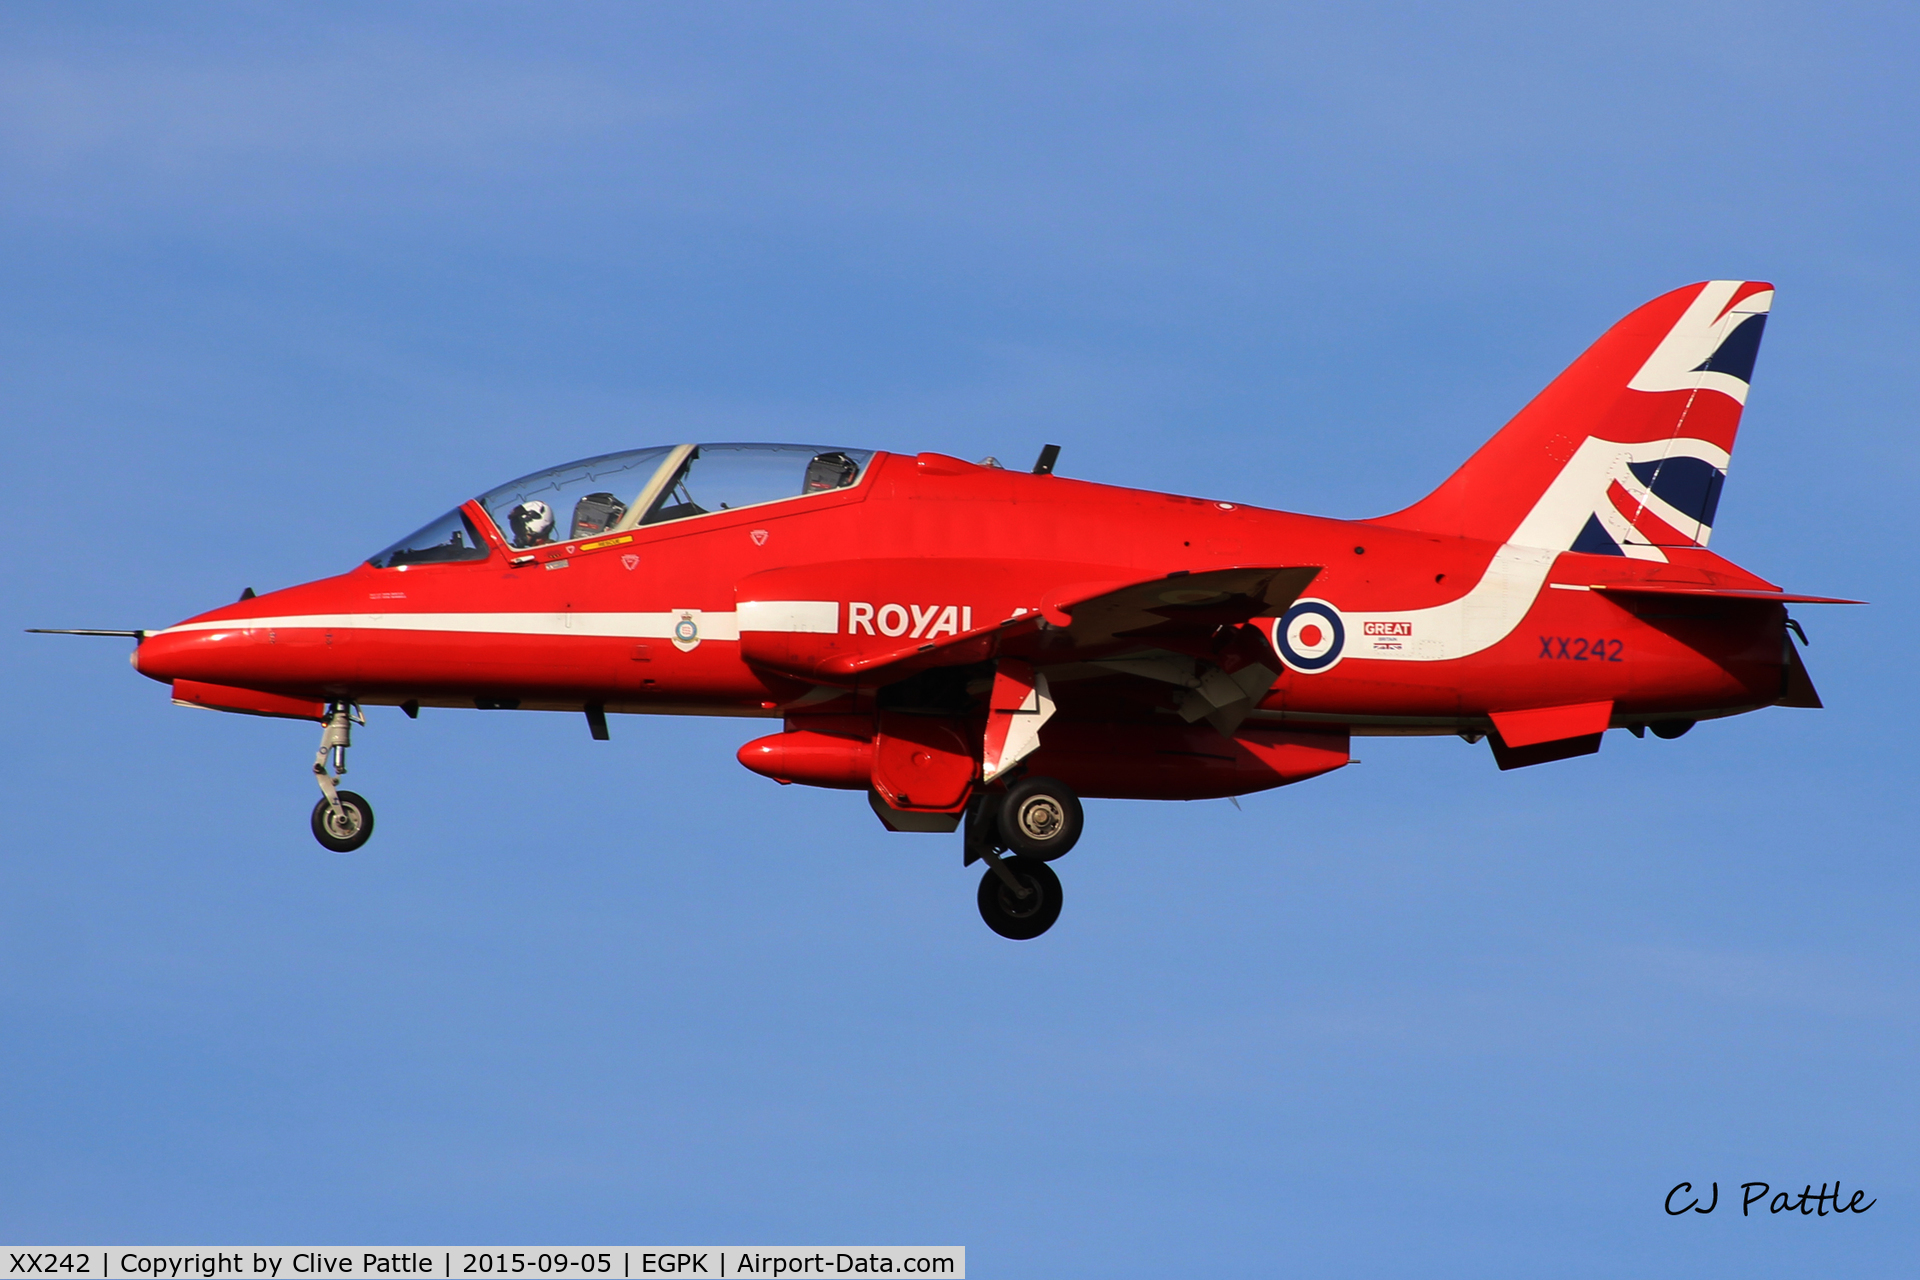 XX242, 1978 Hawker Siddeley Hawk T.1 C/N 078/312078, Flt Lt Stew Campbell 'Red 4' landing back at Prestwick EGPK after displaying with the Red Arrows at the Scottish Airshow 2015 held at Ayr seafront and Prestwick Airport EGPK and at Portrush, Northern Ireland on the same day.